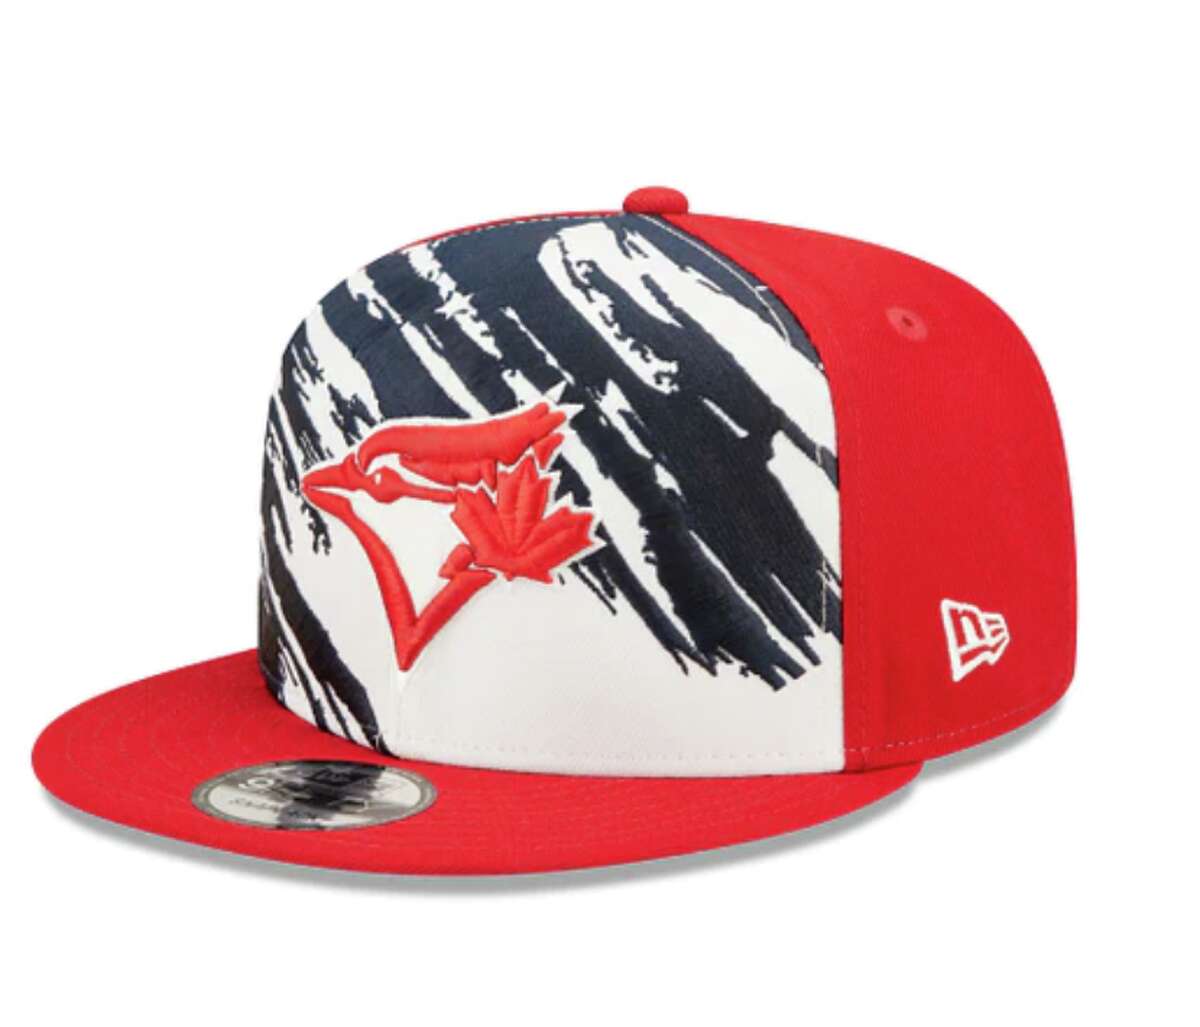 MLB unveils Fourth of July caps, uniforms